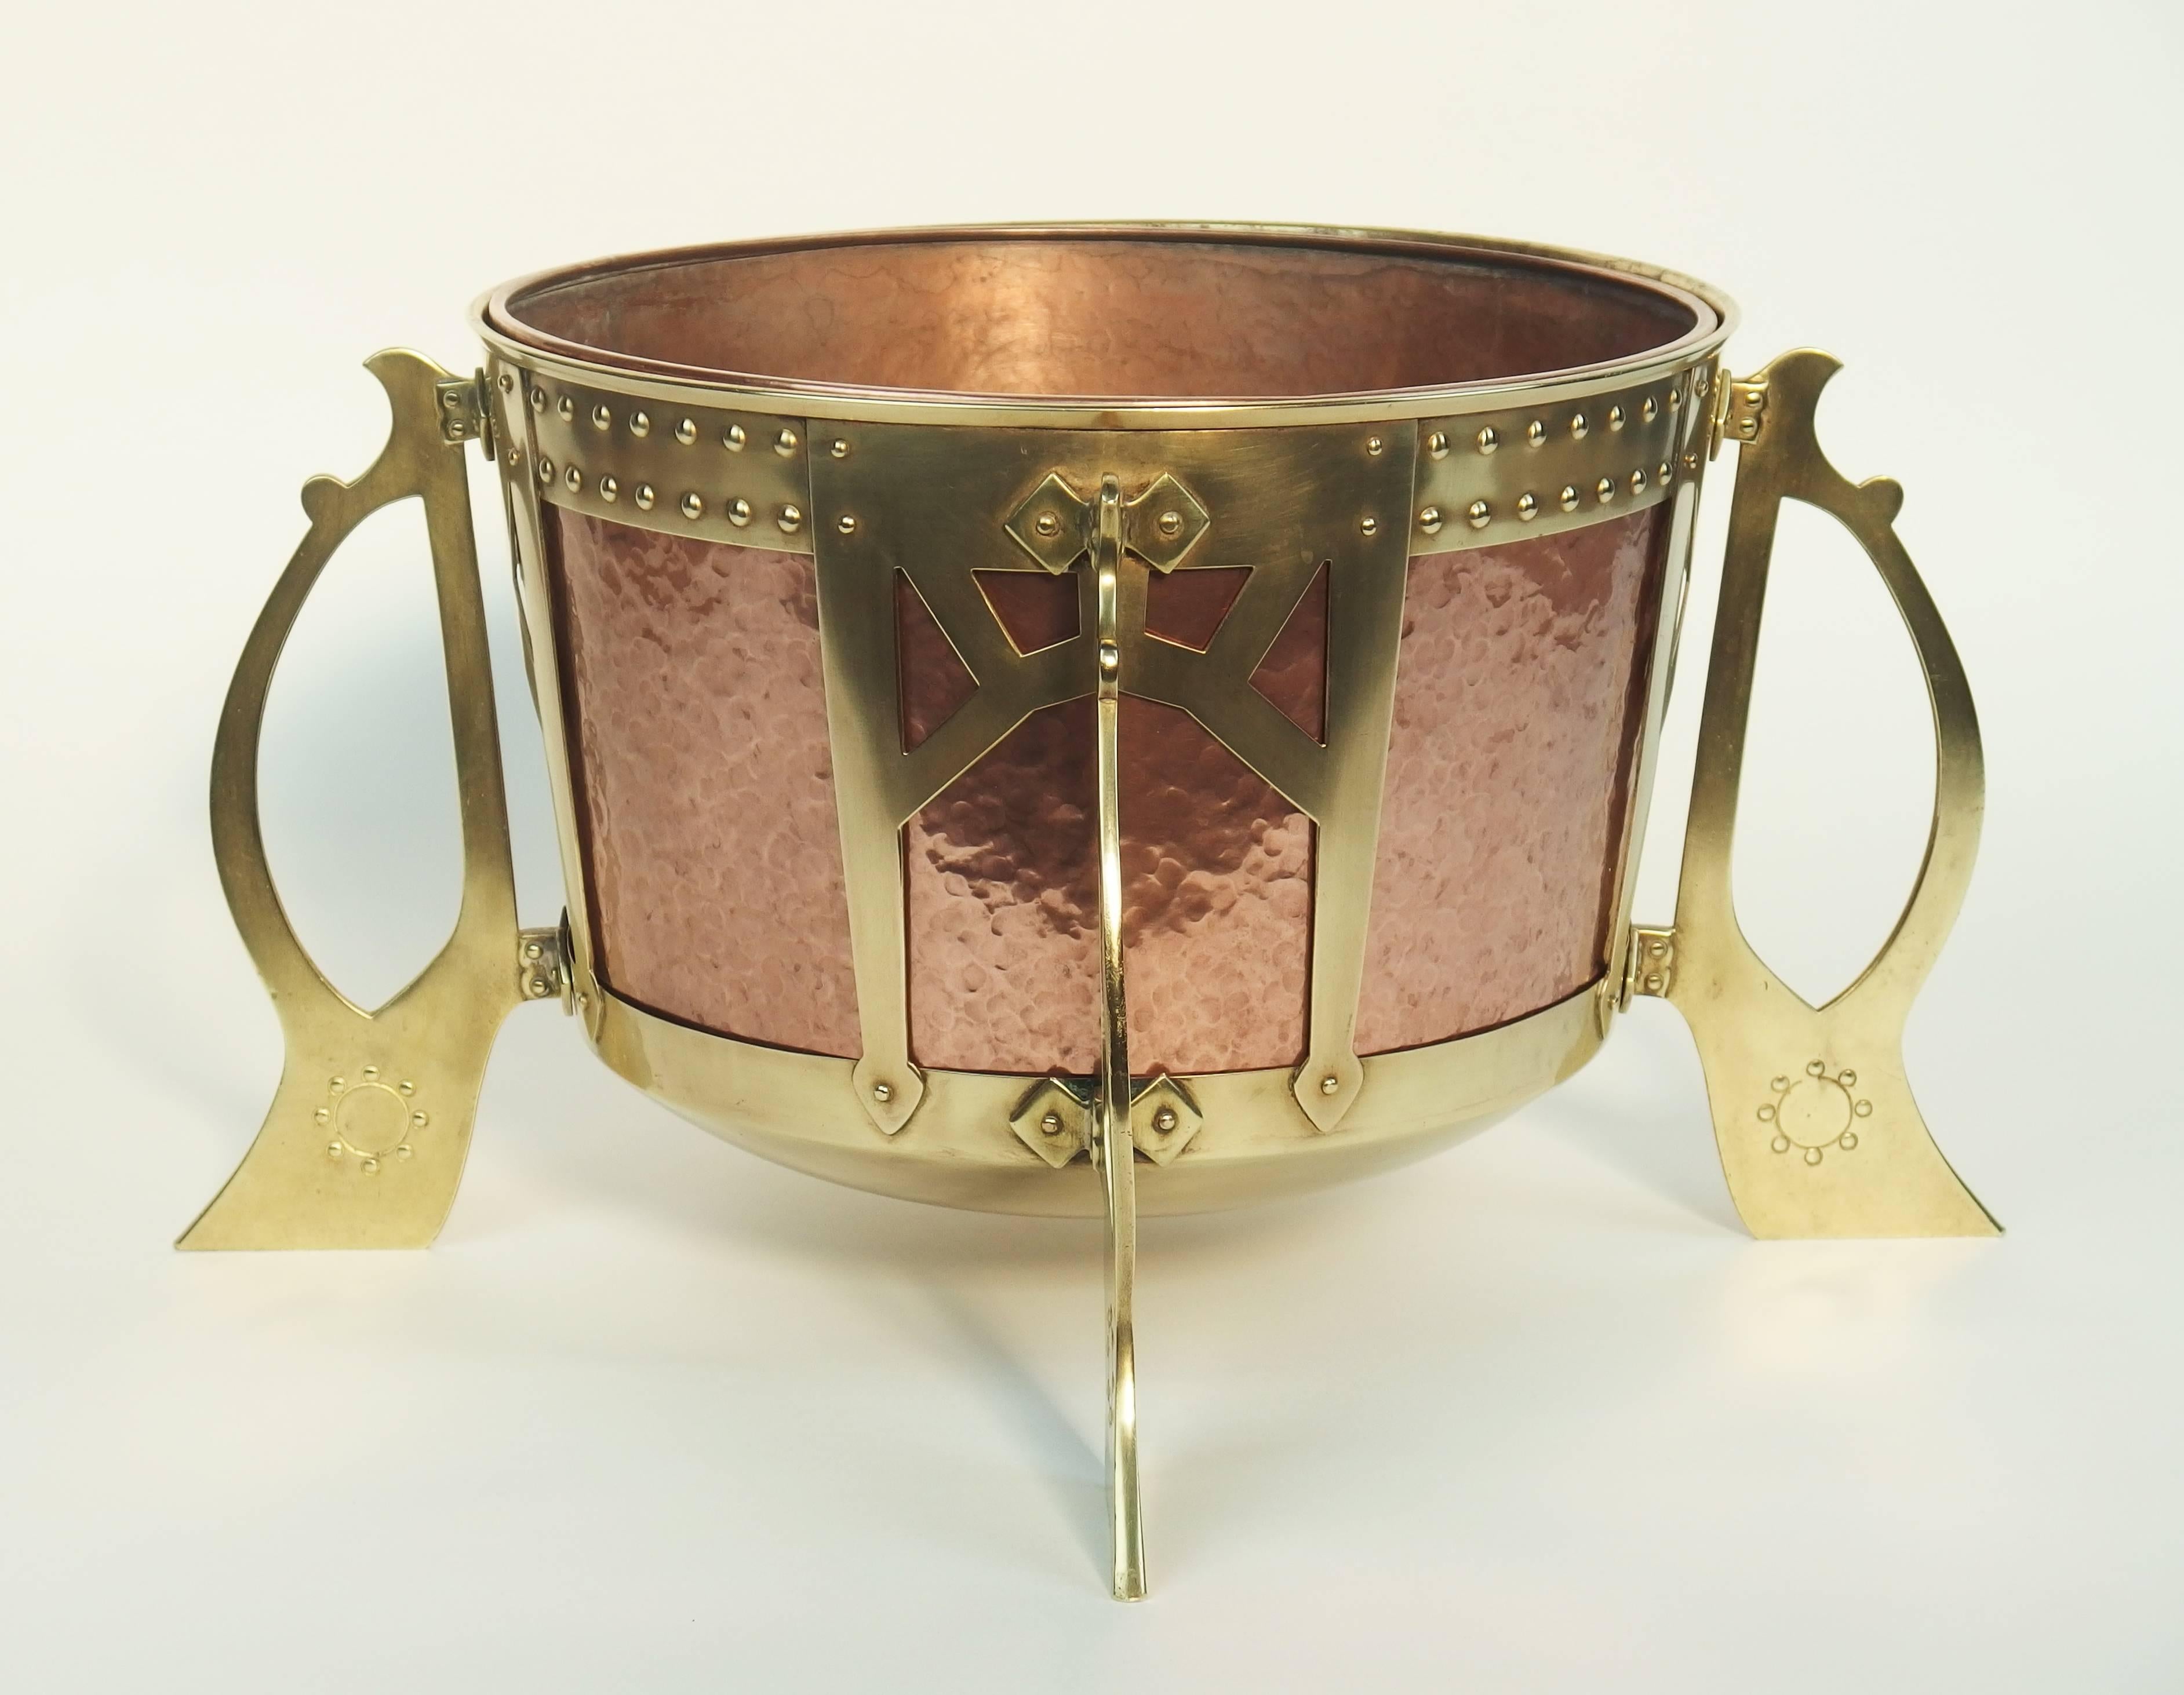 A typical Jugendstil style planter with a removable copper bowl in a brass structure with four handles, signed under the bowl.